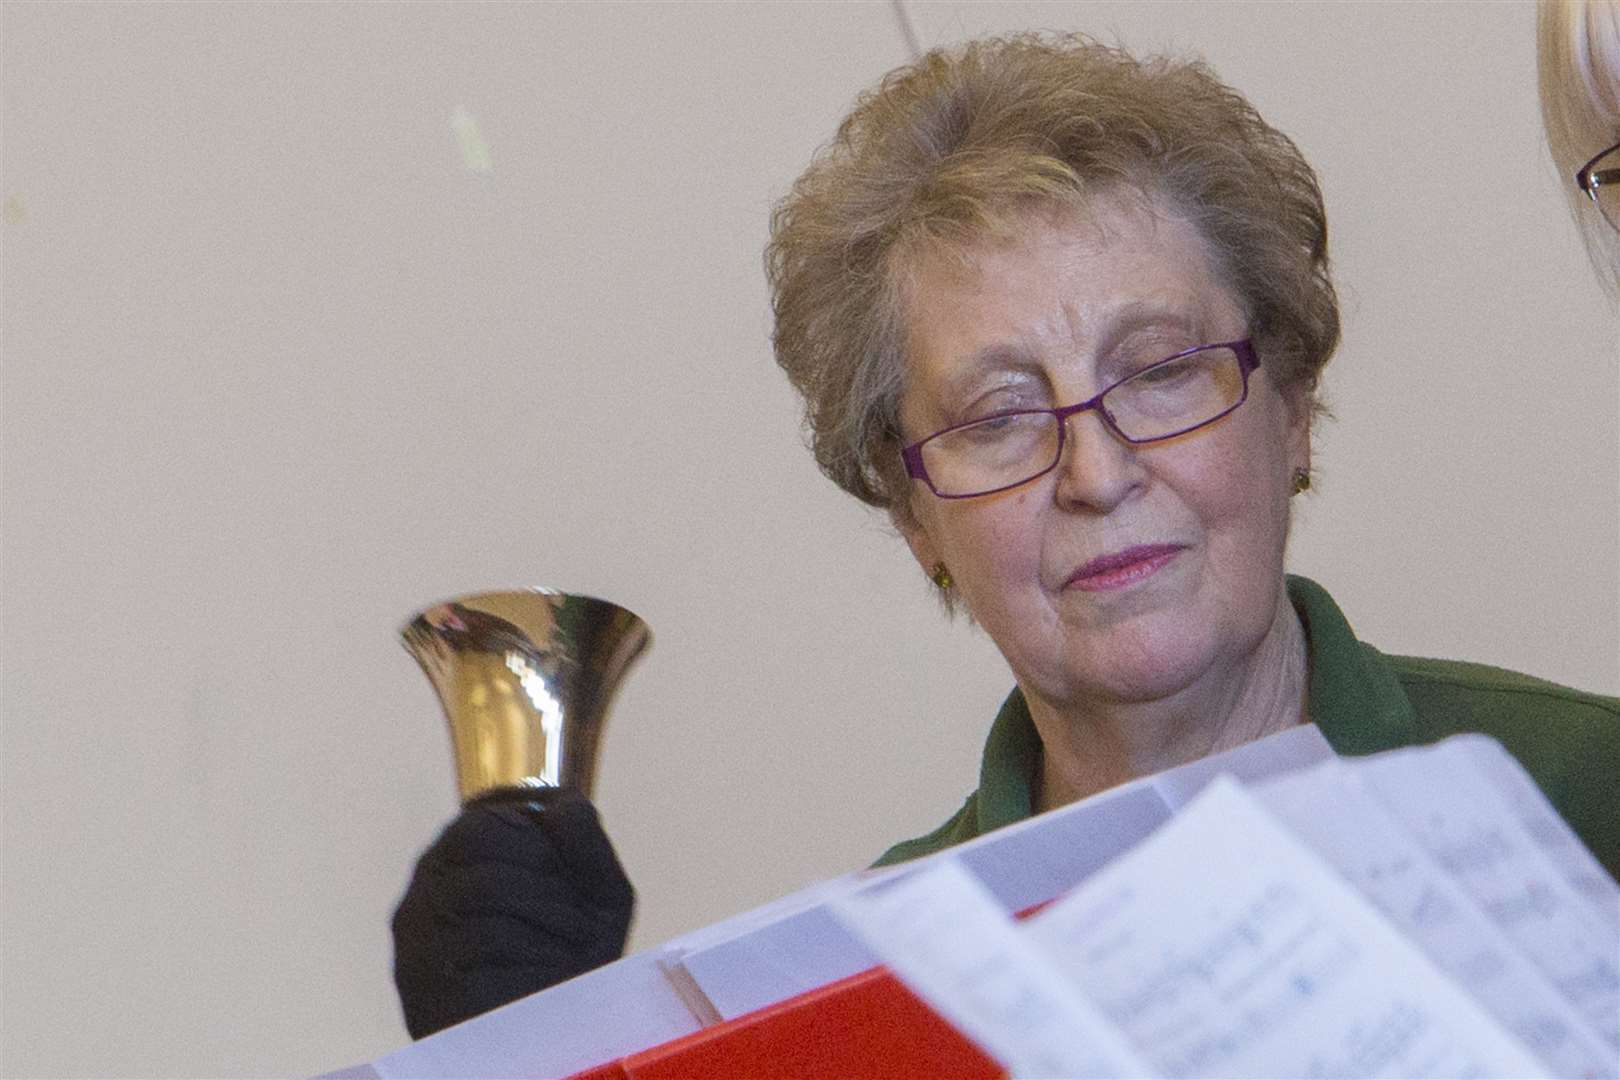 Lyn Ball was primarily responsible for bringing handbell ringing to Caithness when she was part of a group who formed Freswick Handbell Ringers 25 years ago. Eventually they became part of Caithness Handbell Ringers. Picture: Robert MacDonald / Northern Studios